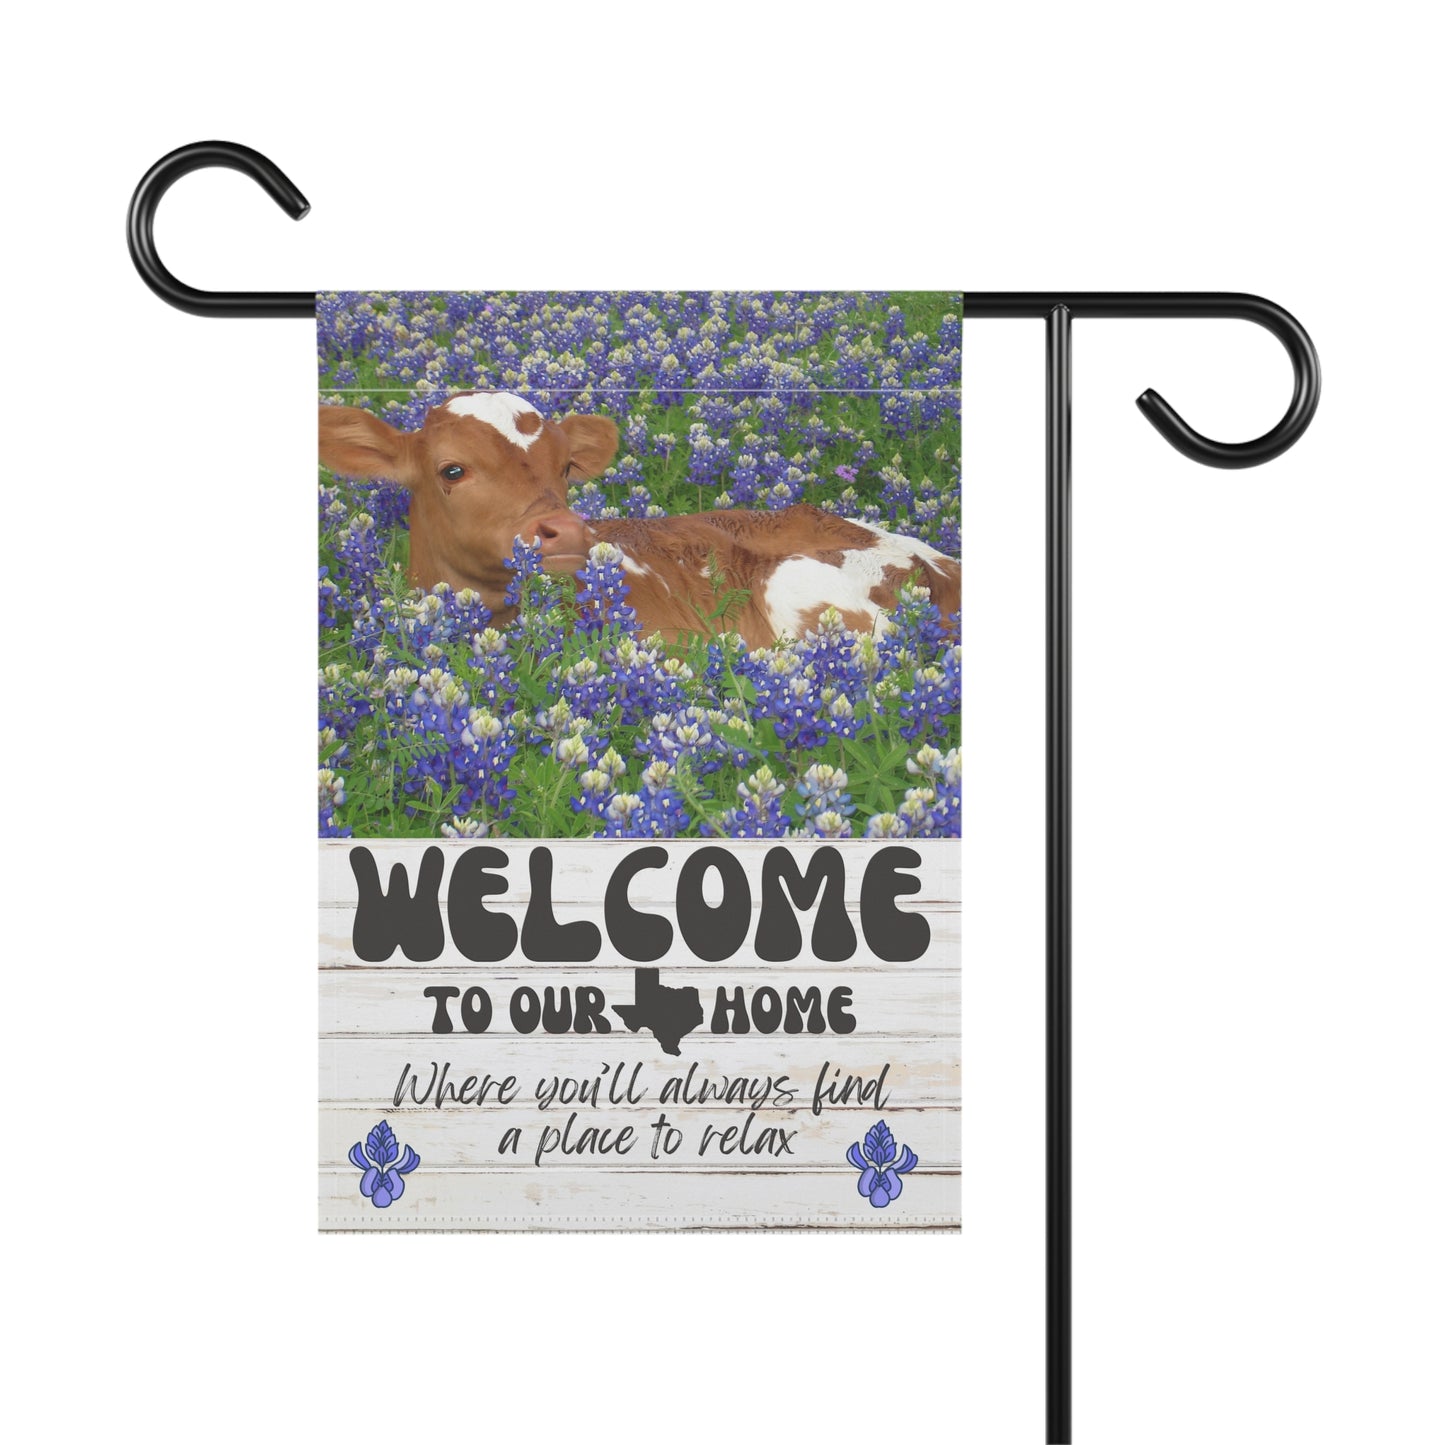 Welcome To Our Home Garden Flag With Cow and Bluebonnets